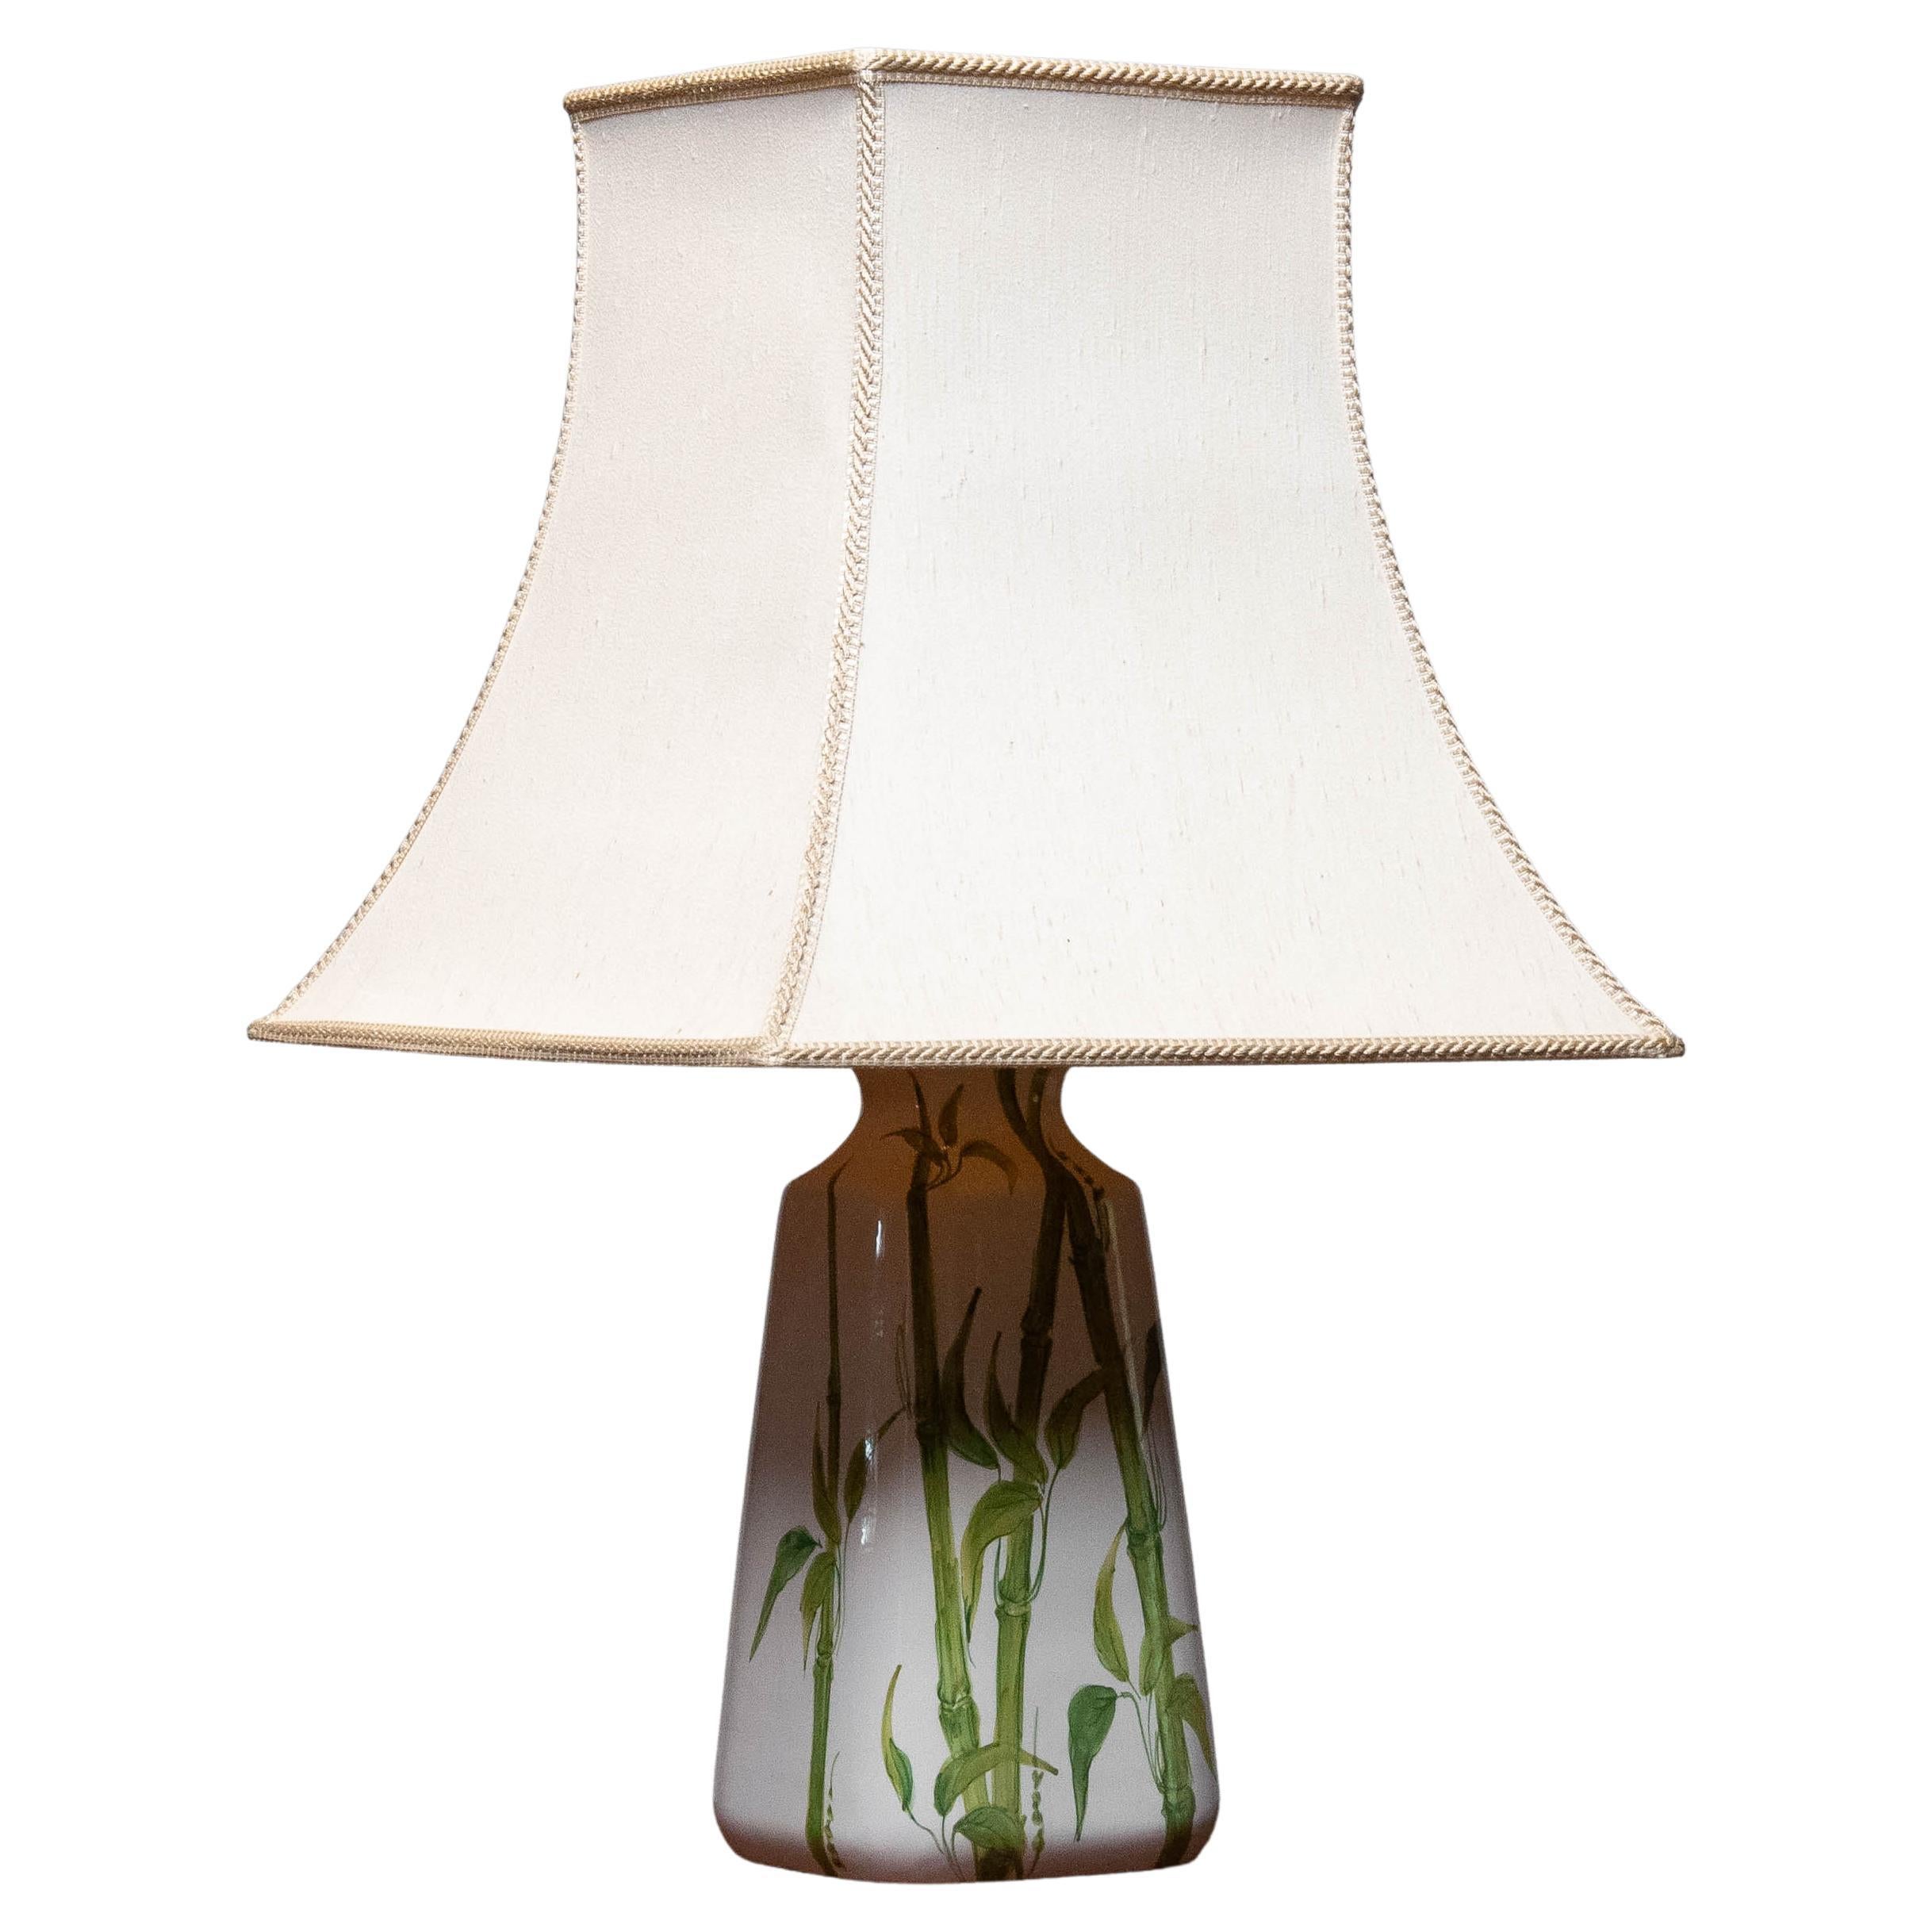 1960s Italian Hand Painted White Ceramic and Glazed Table Lamp with Bamboo Decor